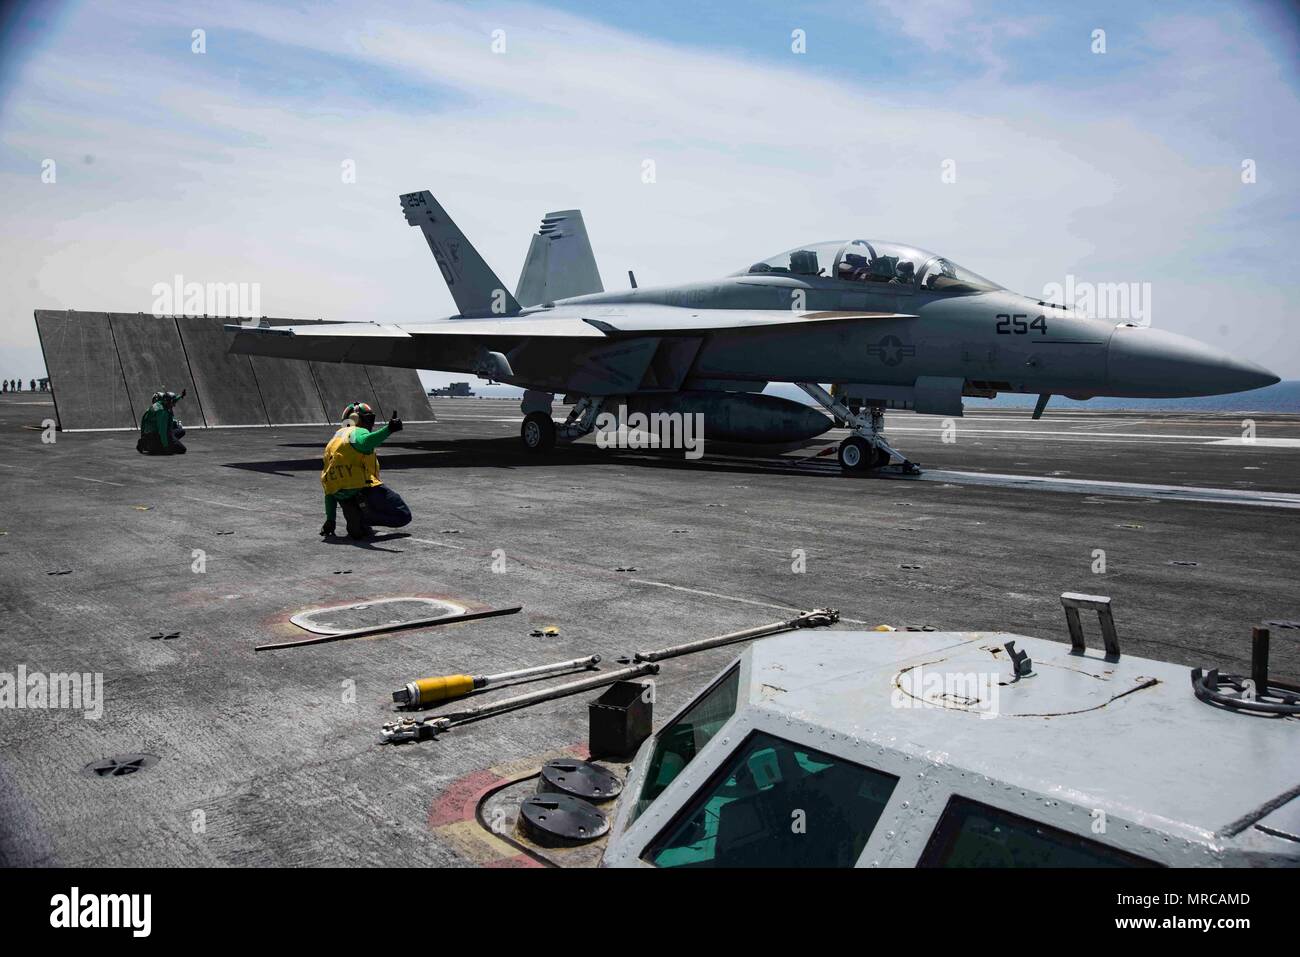 170601-N-KJ380-241  ATLANTIC OCEAN (June 1, 2017) Aviation Boatswain's Mate (Equipment) 2nd Class Ladarrius Robinson signals an F/A-18E Super Hornet assigned to the Gladiators of Strike Fighter Squadron (VFA) 106 for launch on the flight deck of the aircraft carrier USS Dwight D. Eisenhower (CVN 69) (Ike). Ike is currently conducting aircraft carrier qualifications during the sustainment phase of the Optimized Fleet Response Plan (OFRP). (U.S. Navy photo by Mass Communication Specialist Seaman Neo B. Greene III) Stock Photo